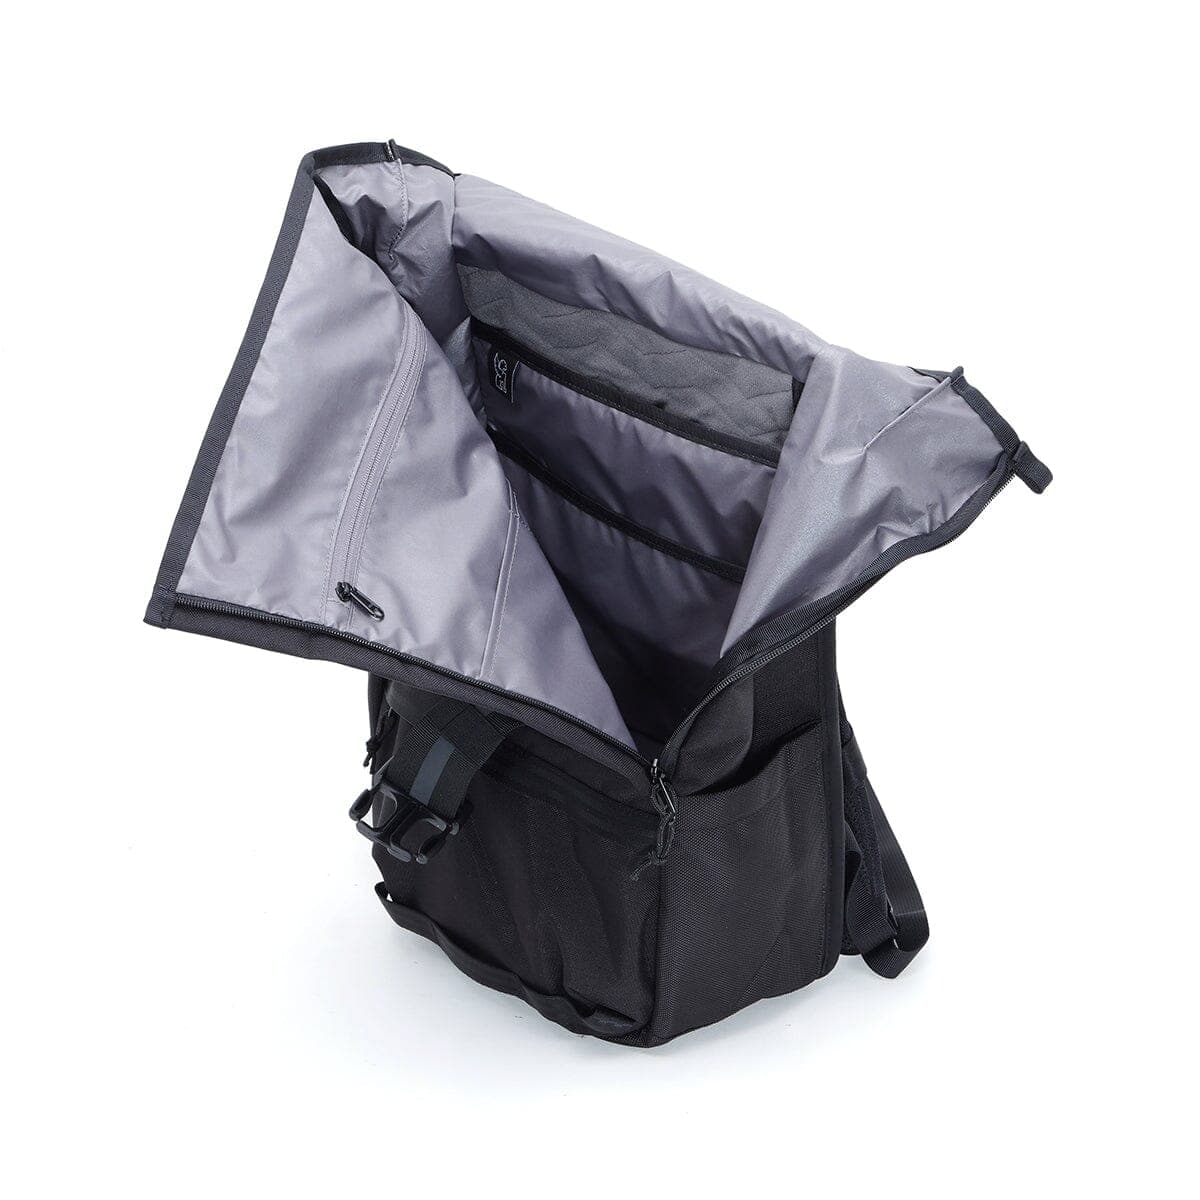 Corbet 24L Backpack inside view with zipper